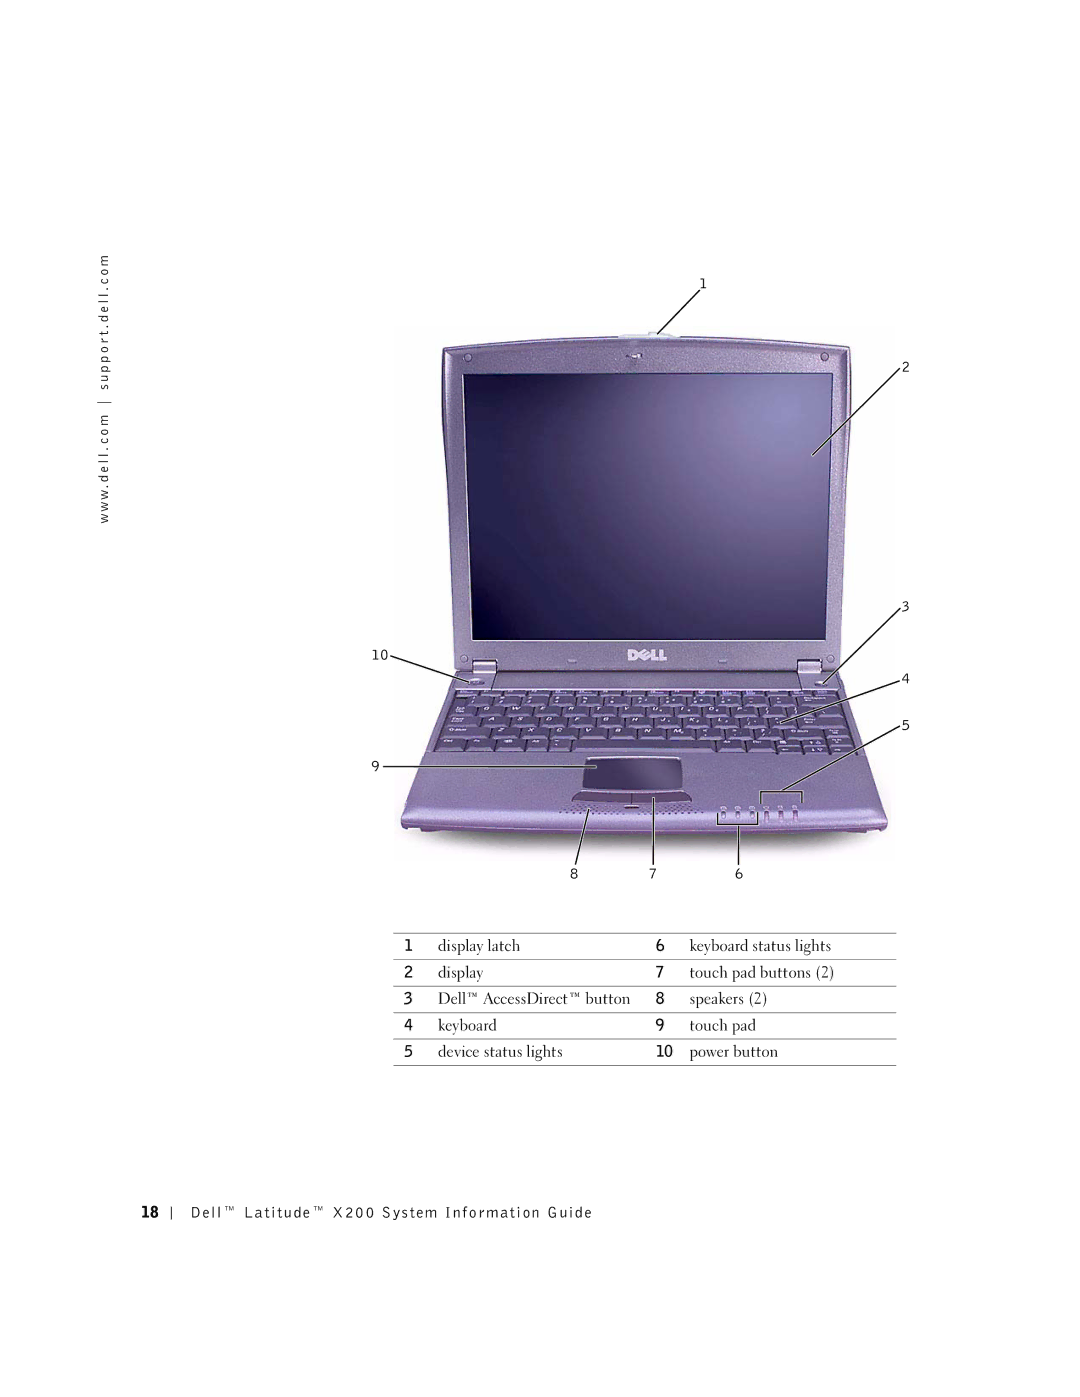 LeapFrog PP03S manual Dell Latitude X200 System Information Guide 